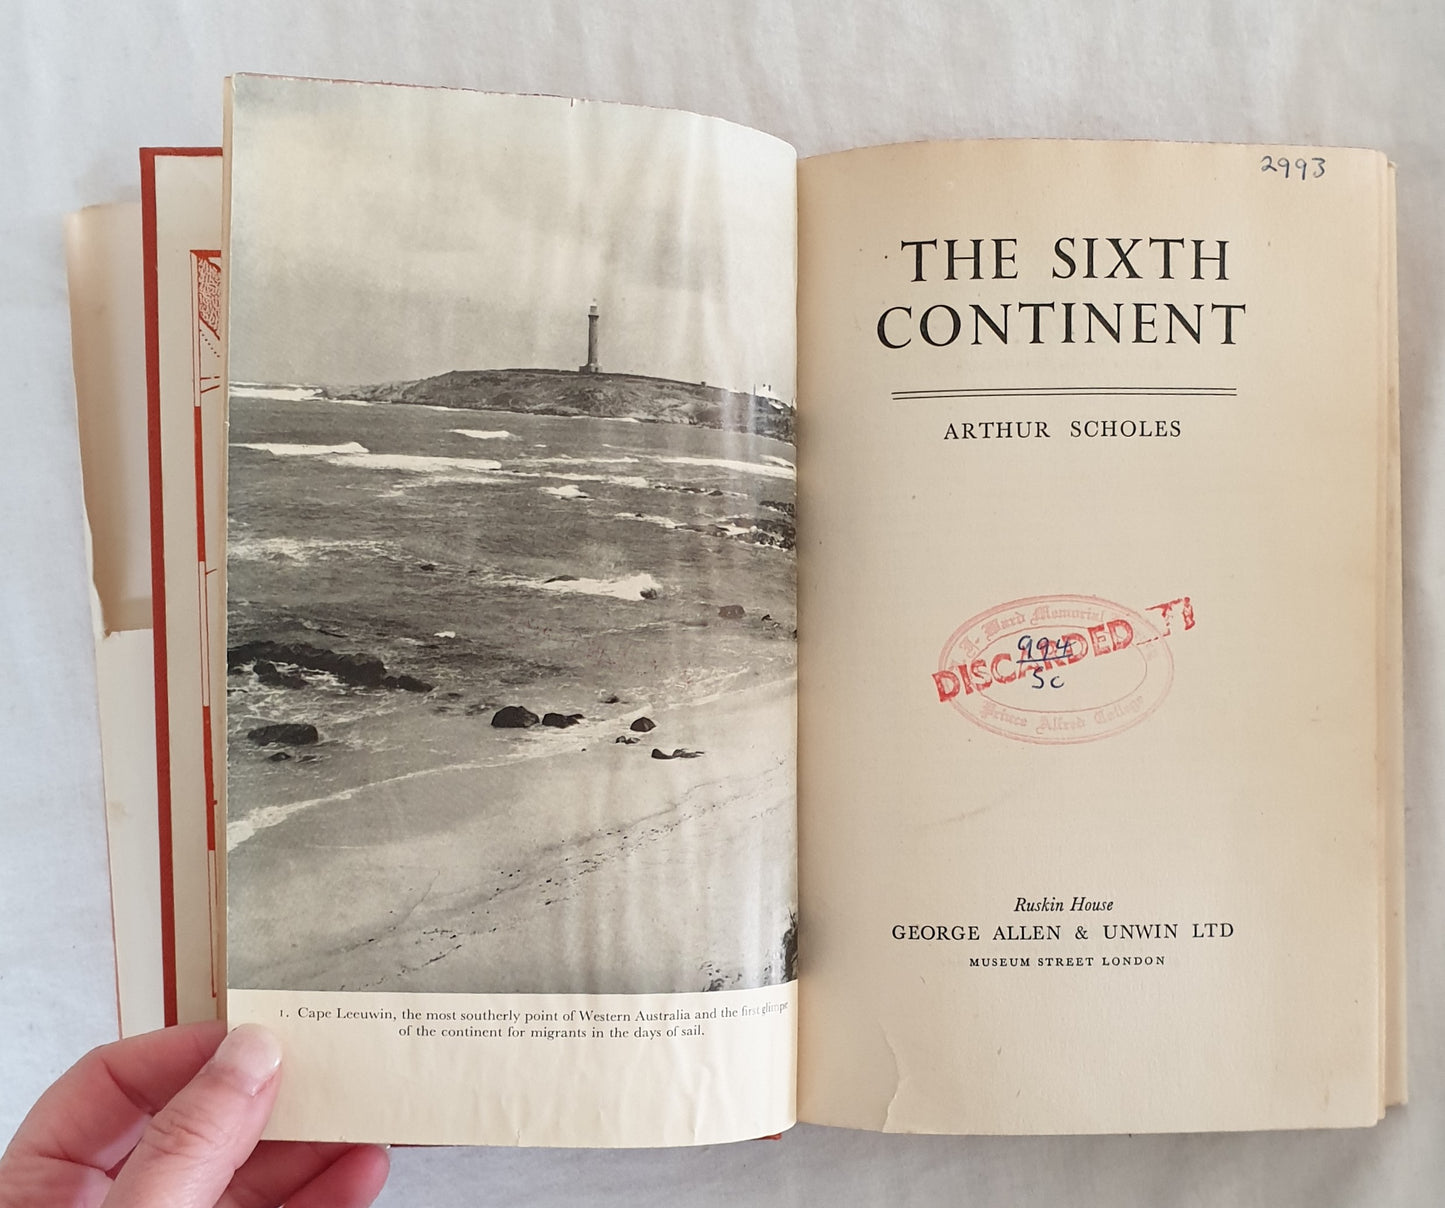 The Sixth Continent by Arthur Scholes